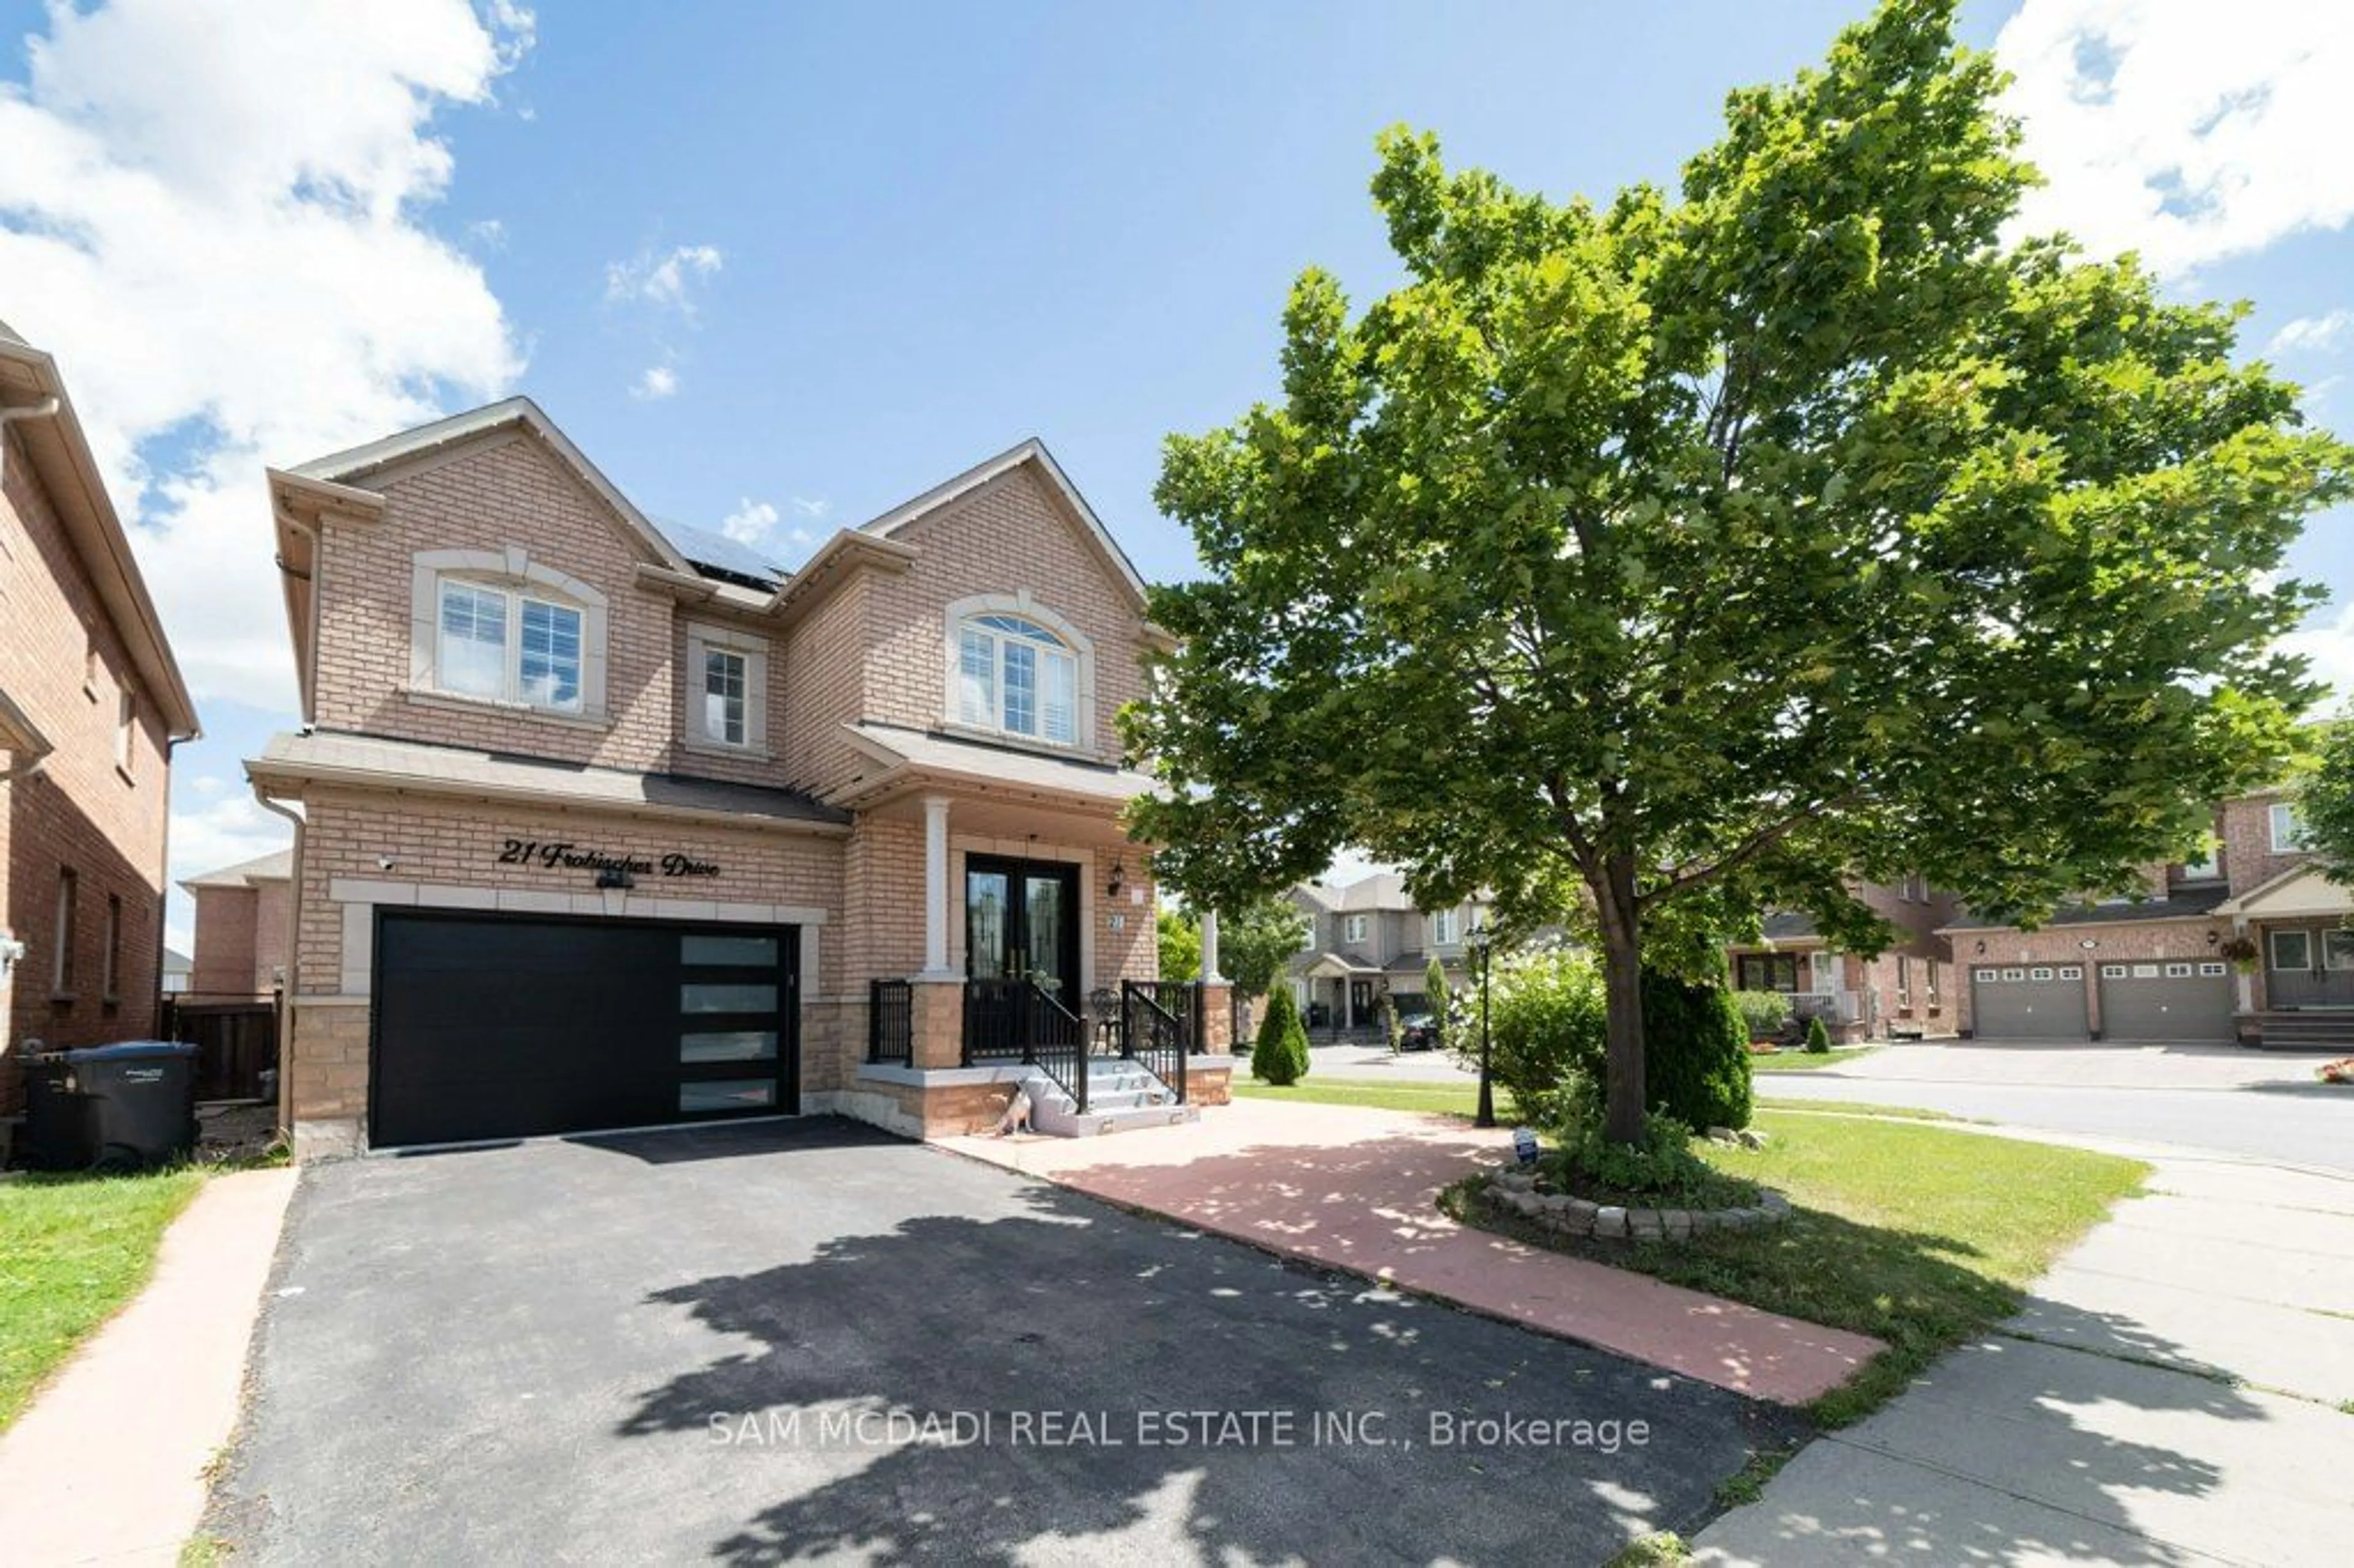 Home with brick exterior material for 21 Frobischer Dr, Brampton Ontario L6R 0L4